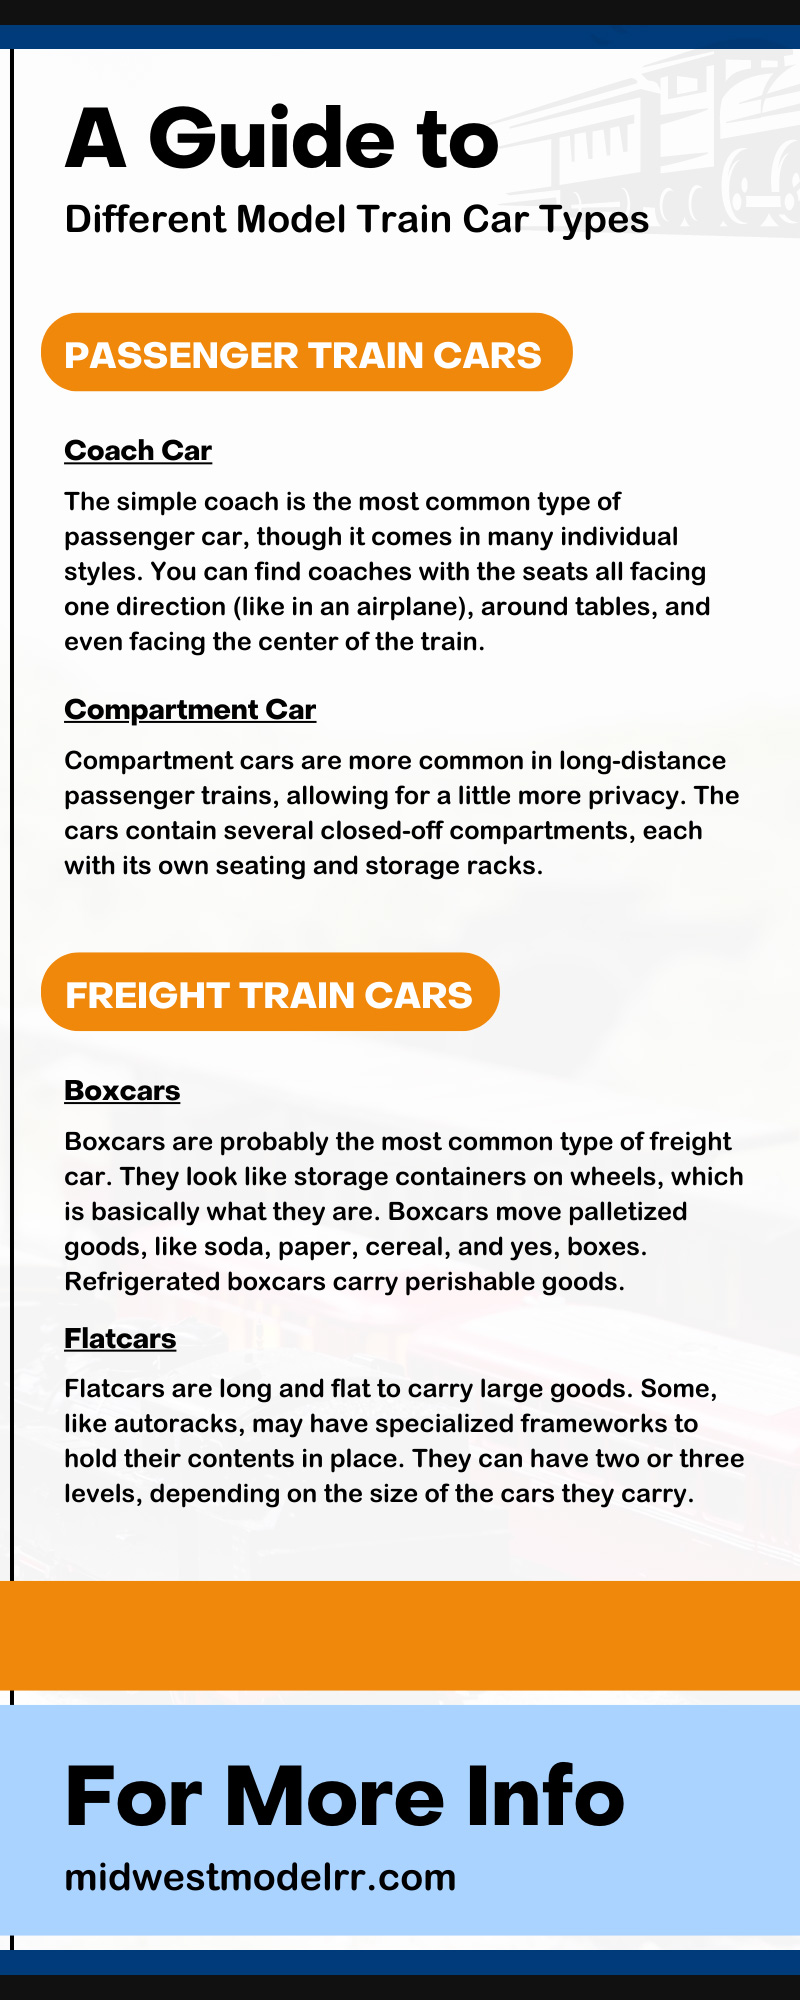 A Guide to Different Model Train Car Types